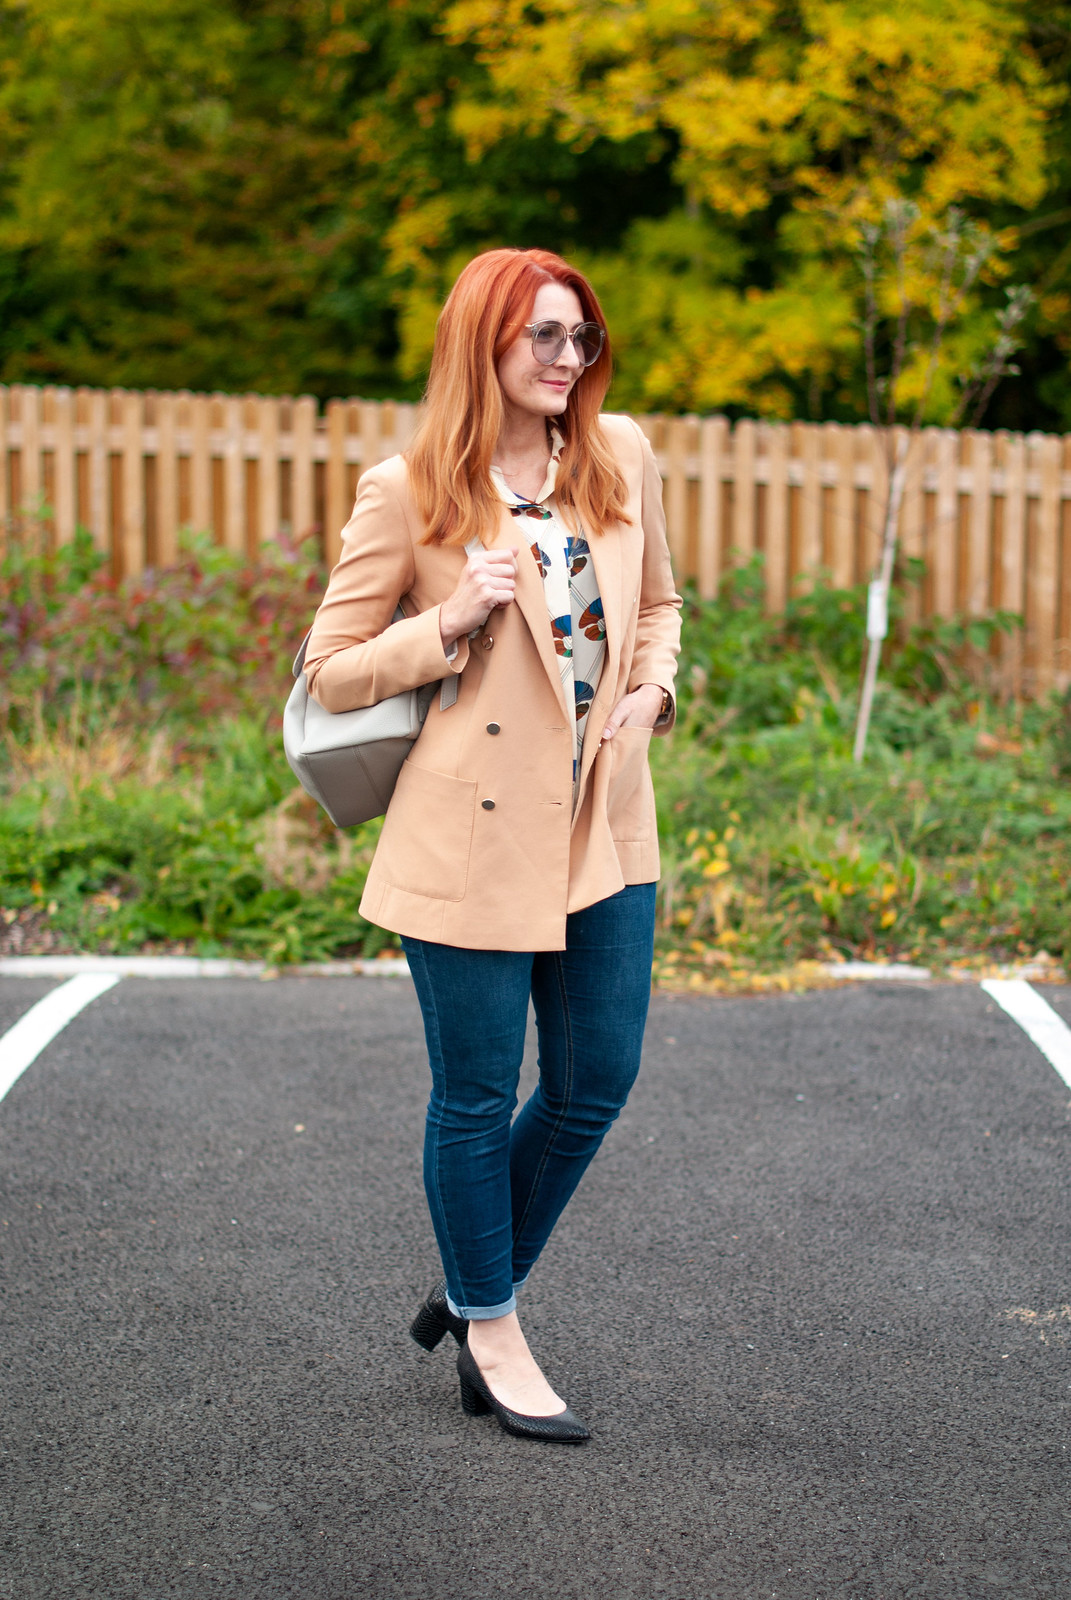 How to Make Jeans Smart for an Informal Meeting \ camel blazer \ dark wash skinny jeans \ patterned blouse \ block heel black shoes \ light grey backpack | Not Dressed As Lamb, over 40 style